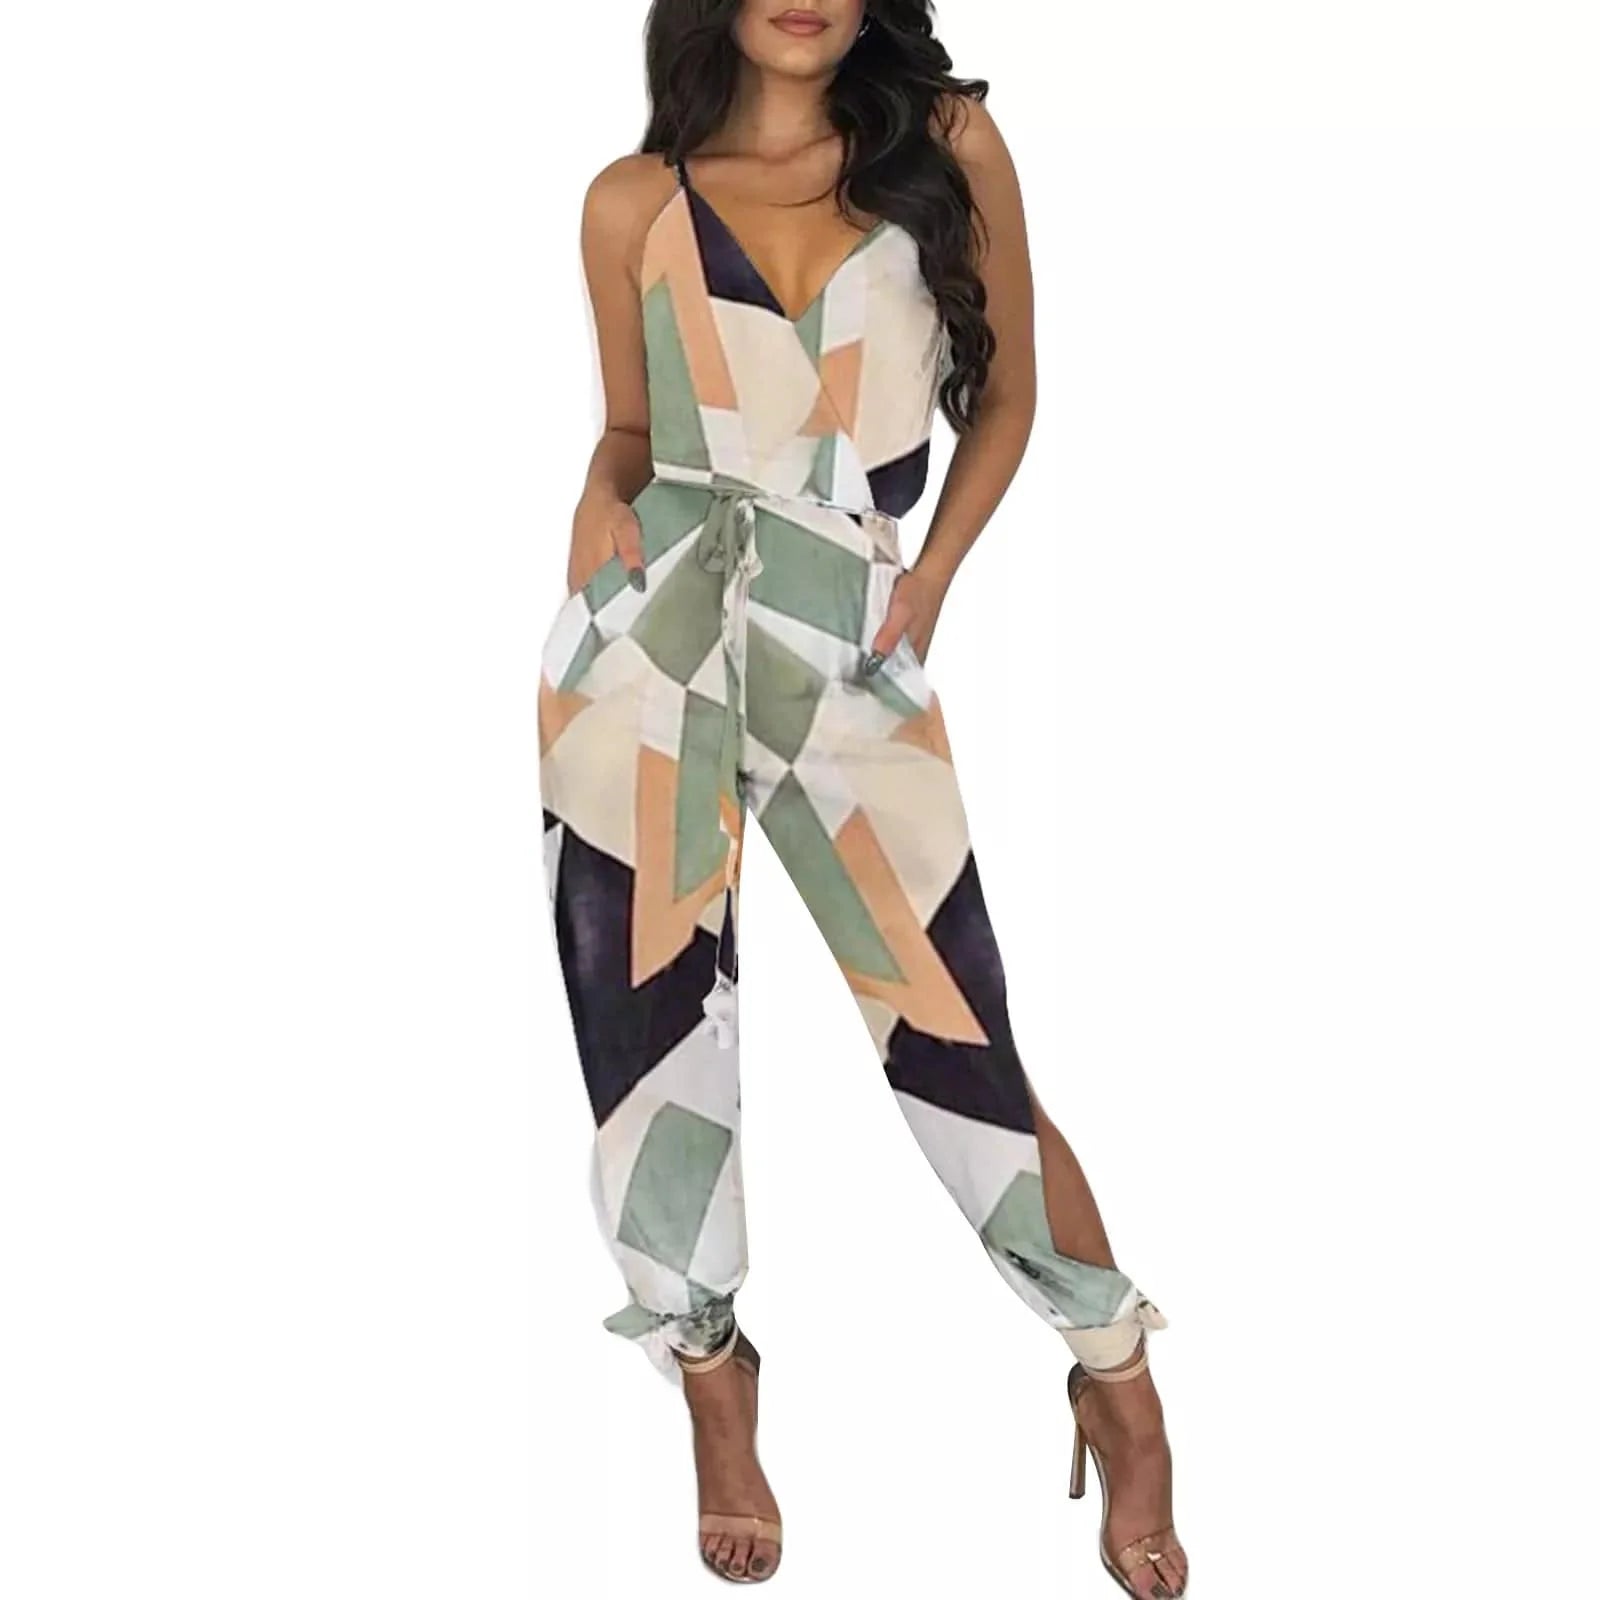 Chic Floral Boho Sleeveless Jumpsuit with V-Neck for Autumn Vibes